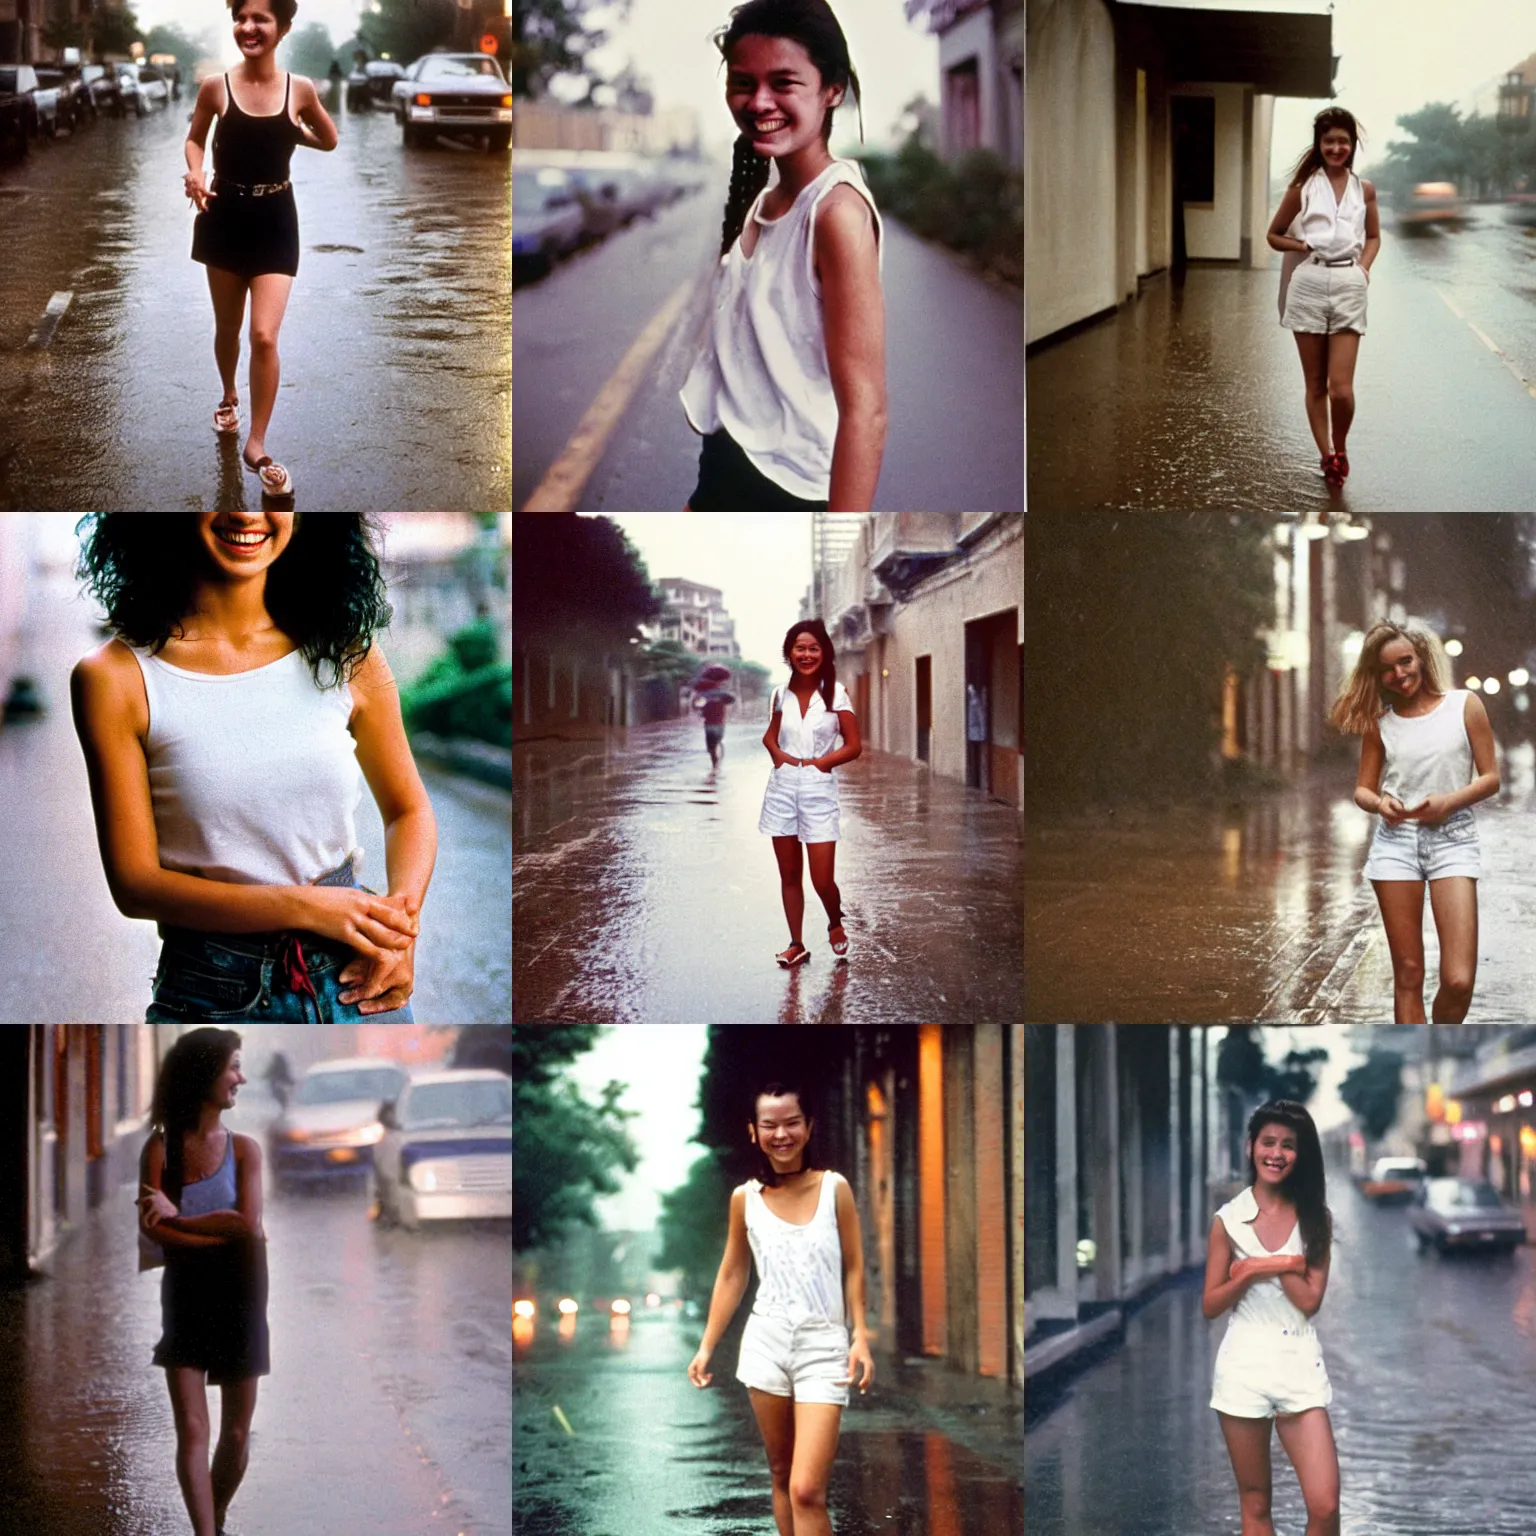 Prompt: A middle-shot from front, color outdoor photograph portrait of a smiling young woman in sleeveless white shirt is walking on the rainy street, ambient lighting, 1990 photo from photograph Magazine.